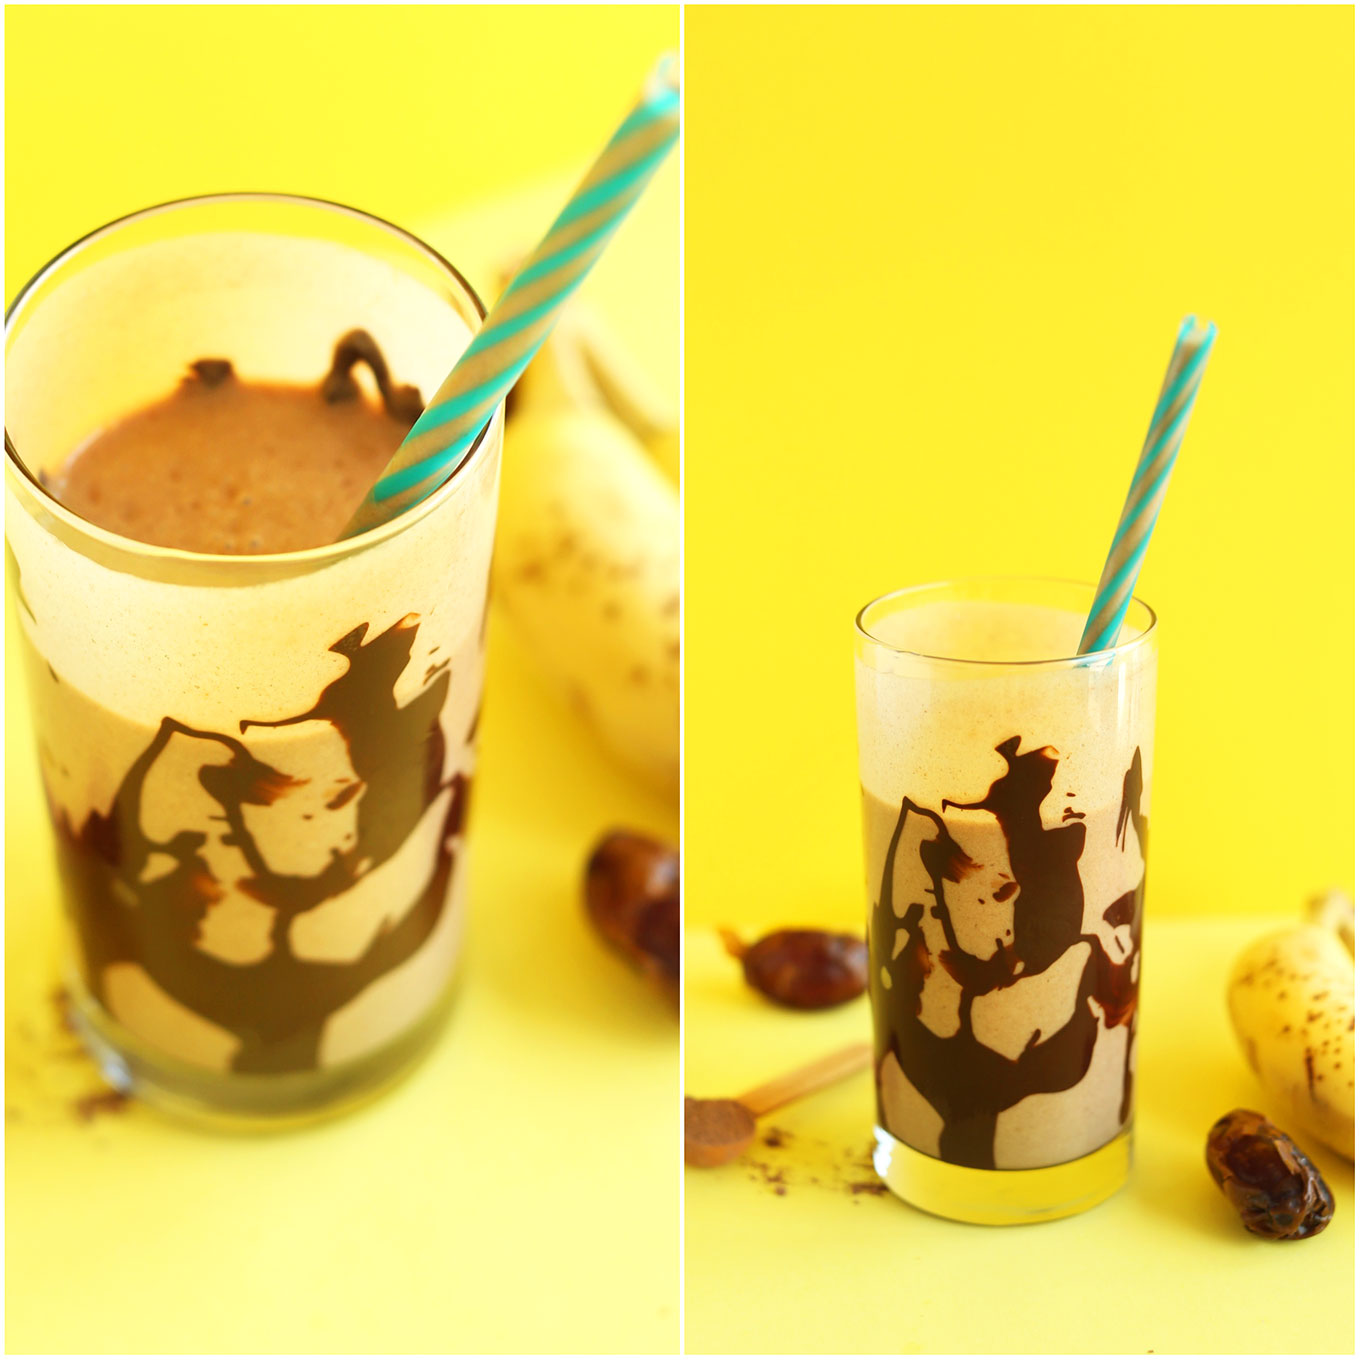 Glasses of our healthy Peanut Butter Banana Chocolate Shake for a gluten-free vegan treat